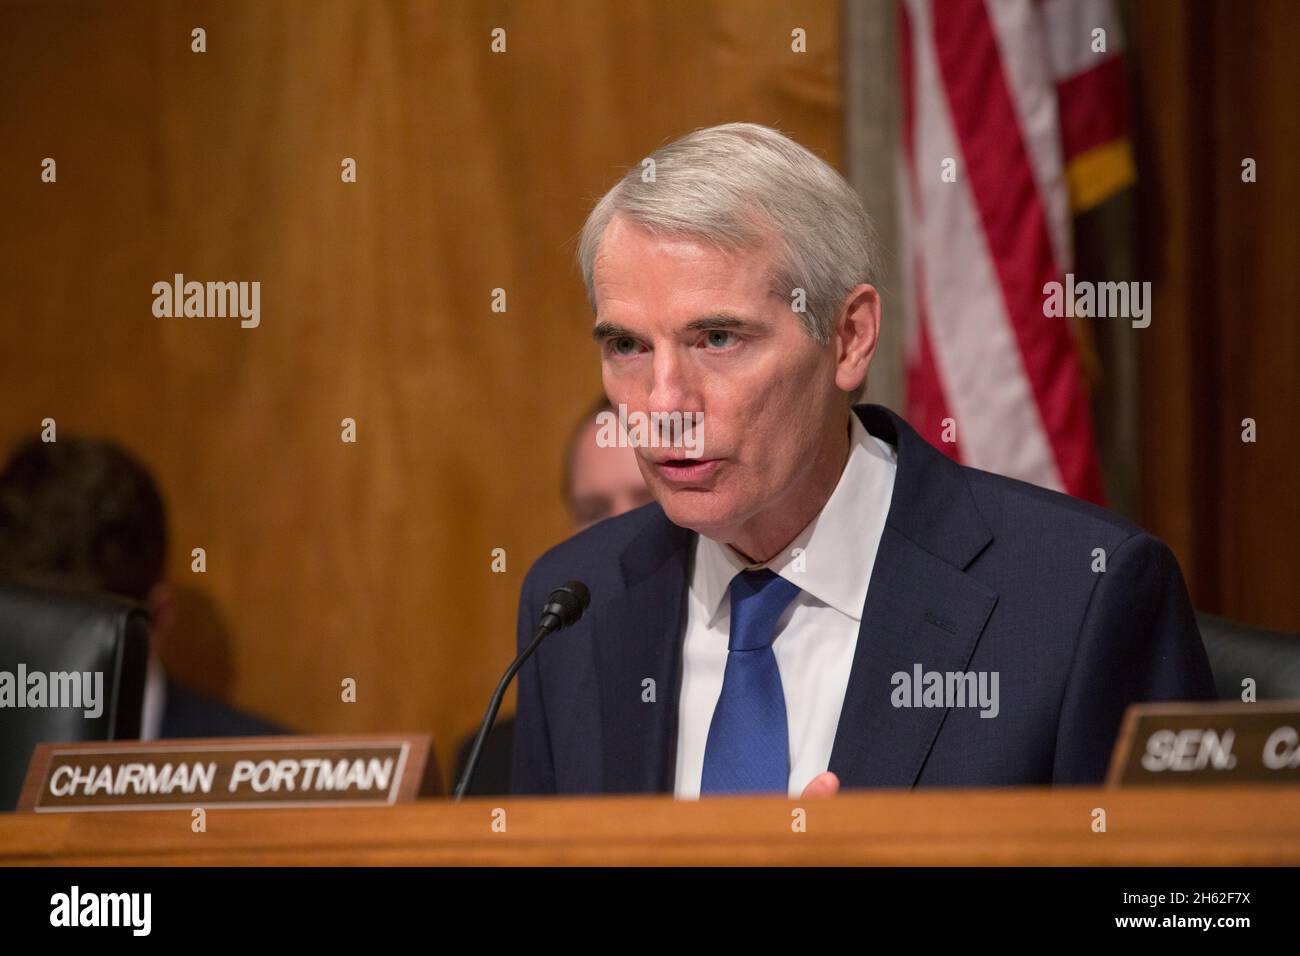 Committee Chairman Sen. Rob Portman makes opening comments as U.S. Customs and Border Protection Acting Executive Assistant Commissioner for Operations Support Robert Perez testifies before the Senate Governmental Affairs Committee during a subcommittee hearing on U.S. strategy to combat illicit drugs in the Permanent Subcommittee on Investigations titledÔ 'Stopping the Shipment of Synthetic Opioids: Oversight of U.S. Strategy to Combat Illicit Drugs' in Washington, D.C., May 25, 2017 Stock Photo